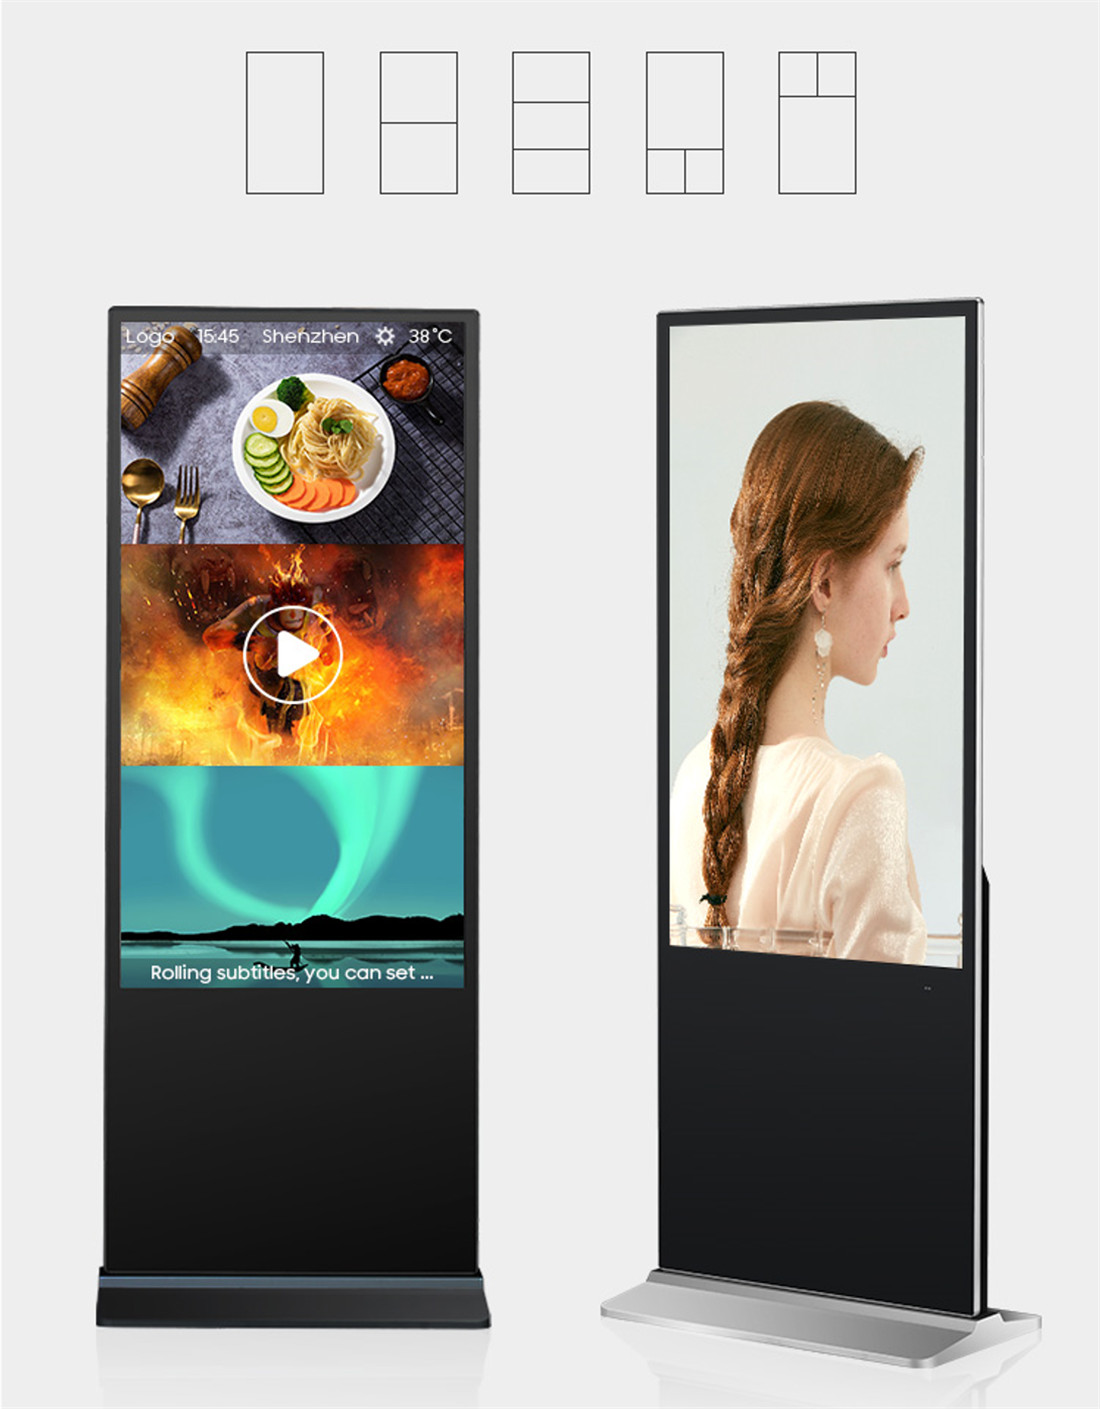 About  Digital Signage (7)